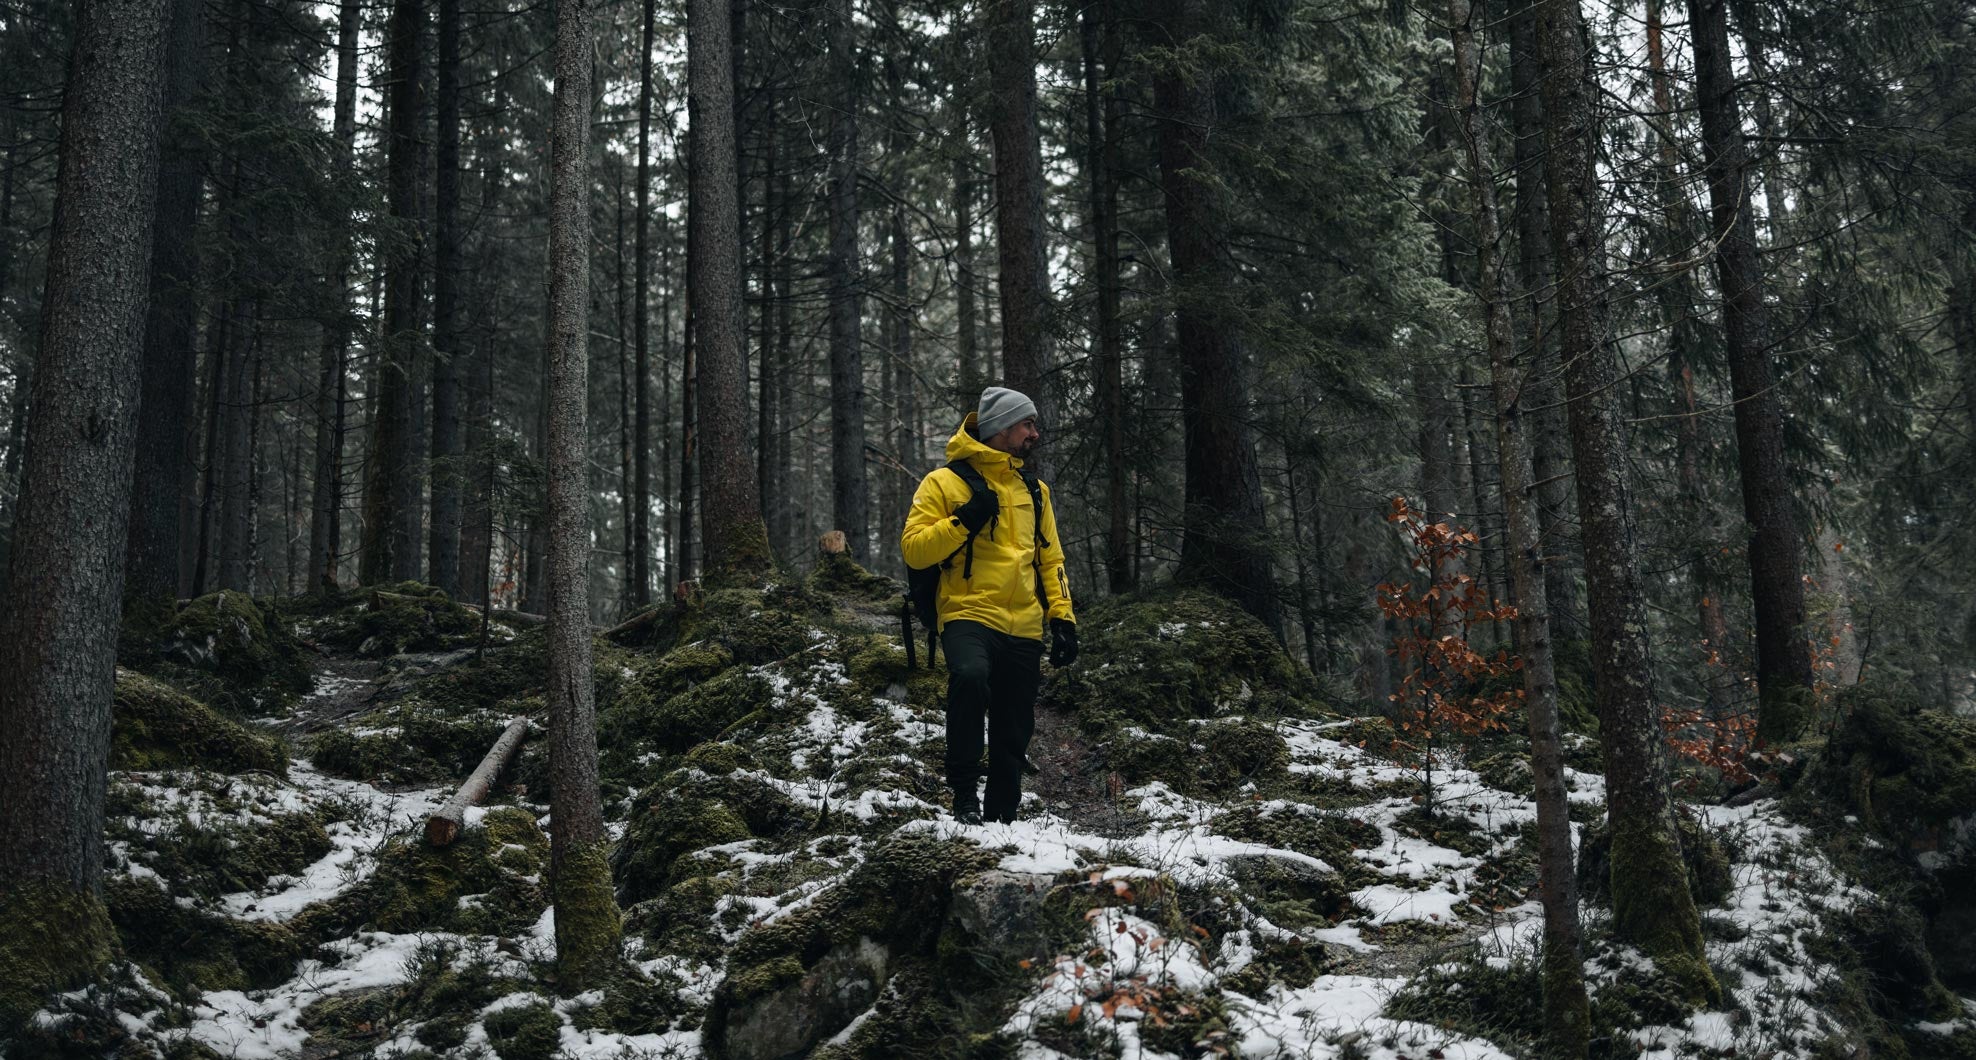 5 tips for hiking safely in winter